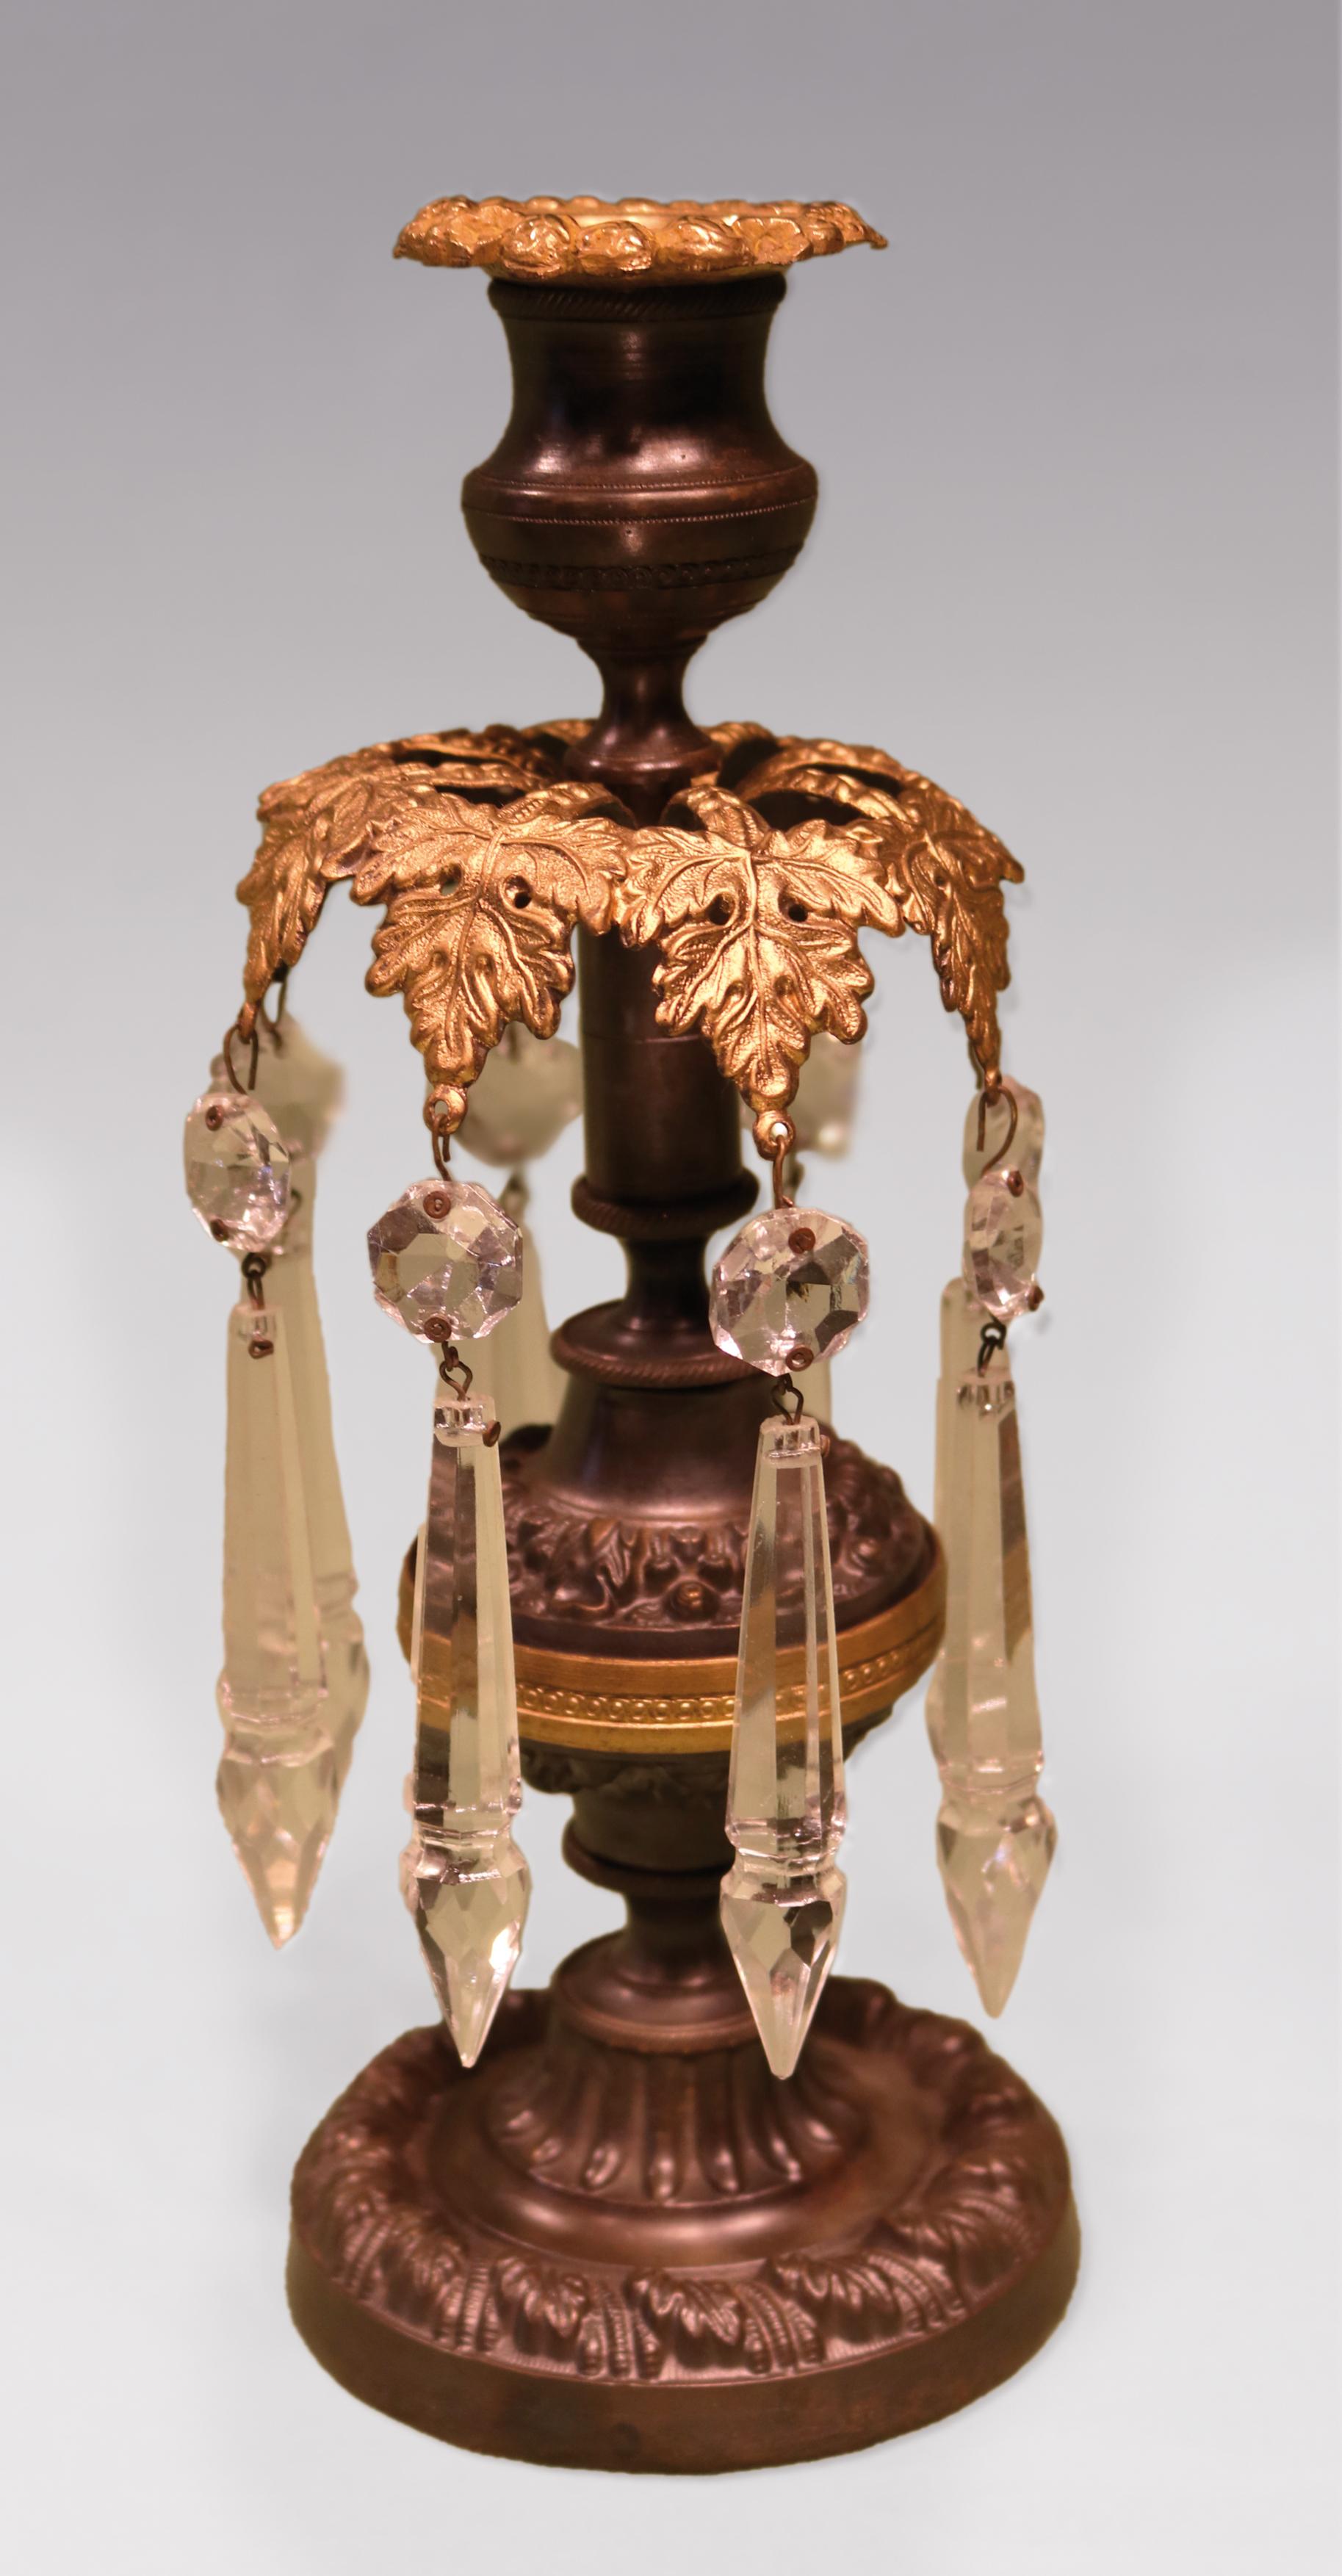 A pair of early 19th century Regency period bronze and ormolu lustre candlesticks having floral sconces above leaf canopies and bulbous stems with engine-turned central ring, raised on circular bases.